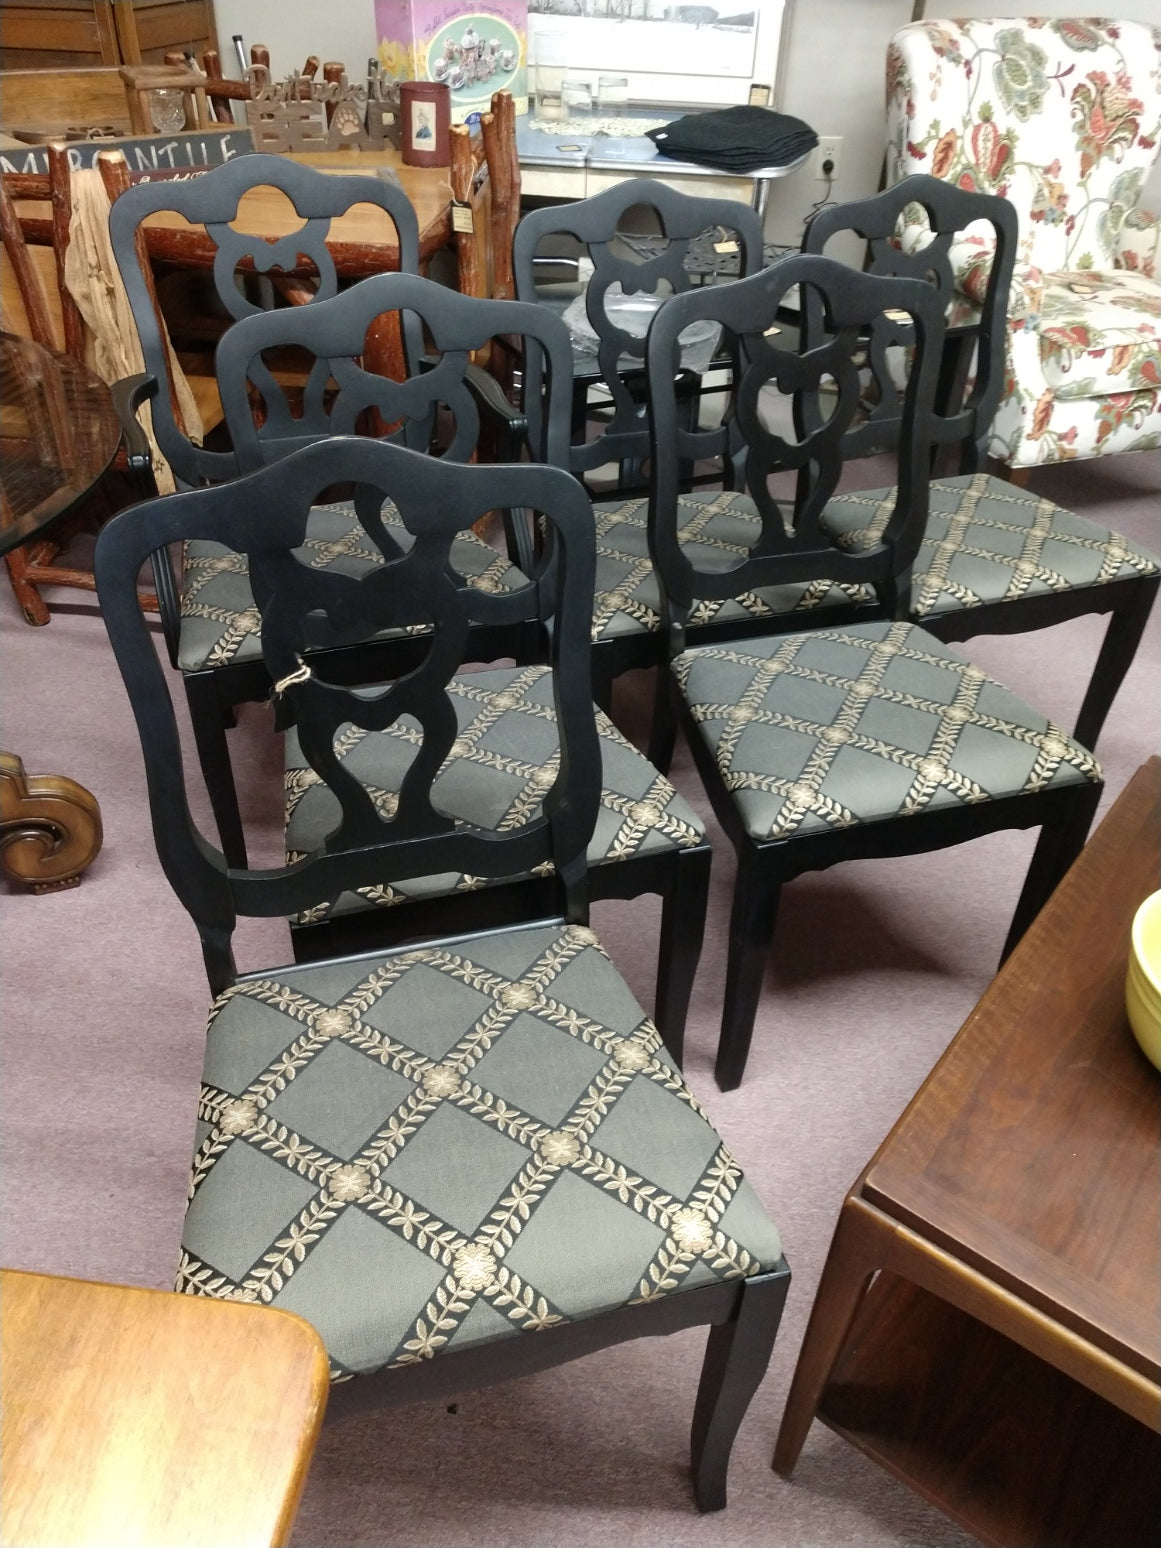 Set of 6 Black Chairs